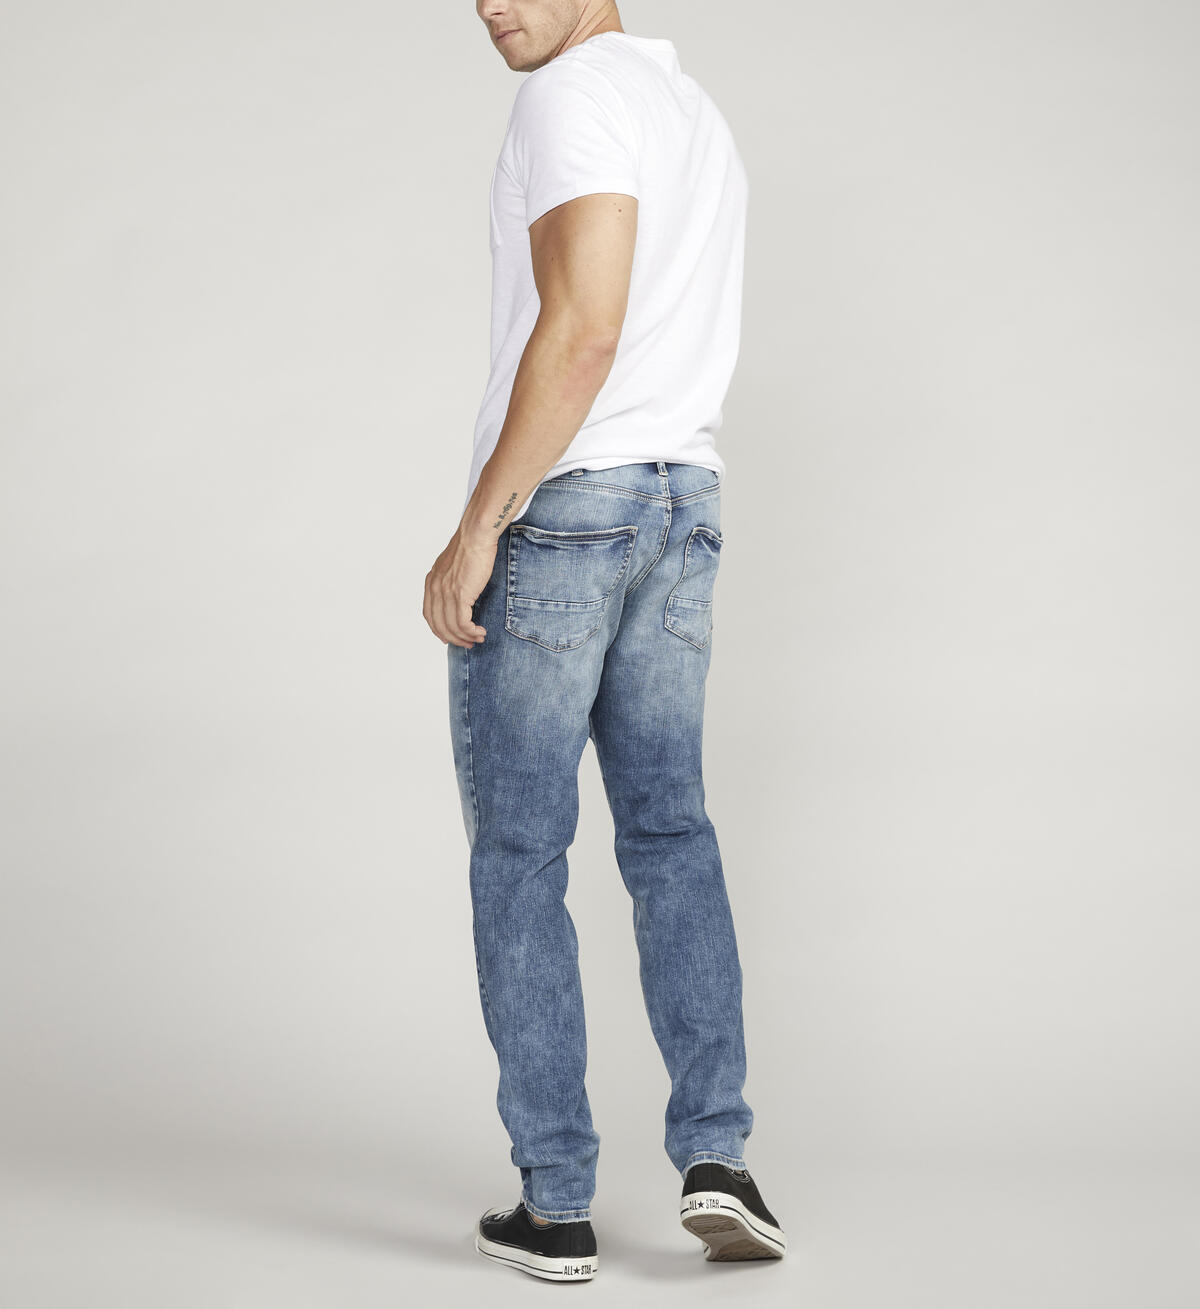 Risto Athletic Fit Skinny Jeans, , hi-res image number 1